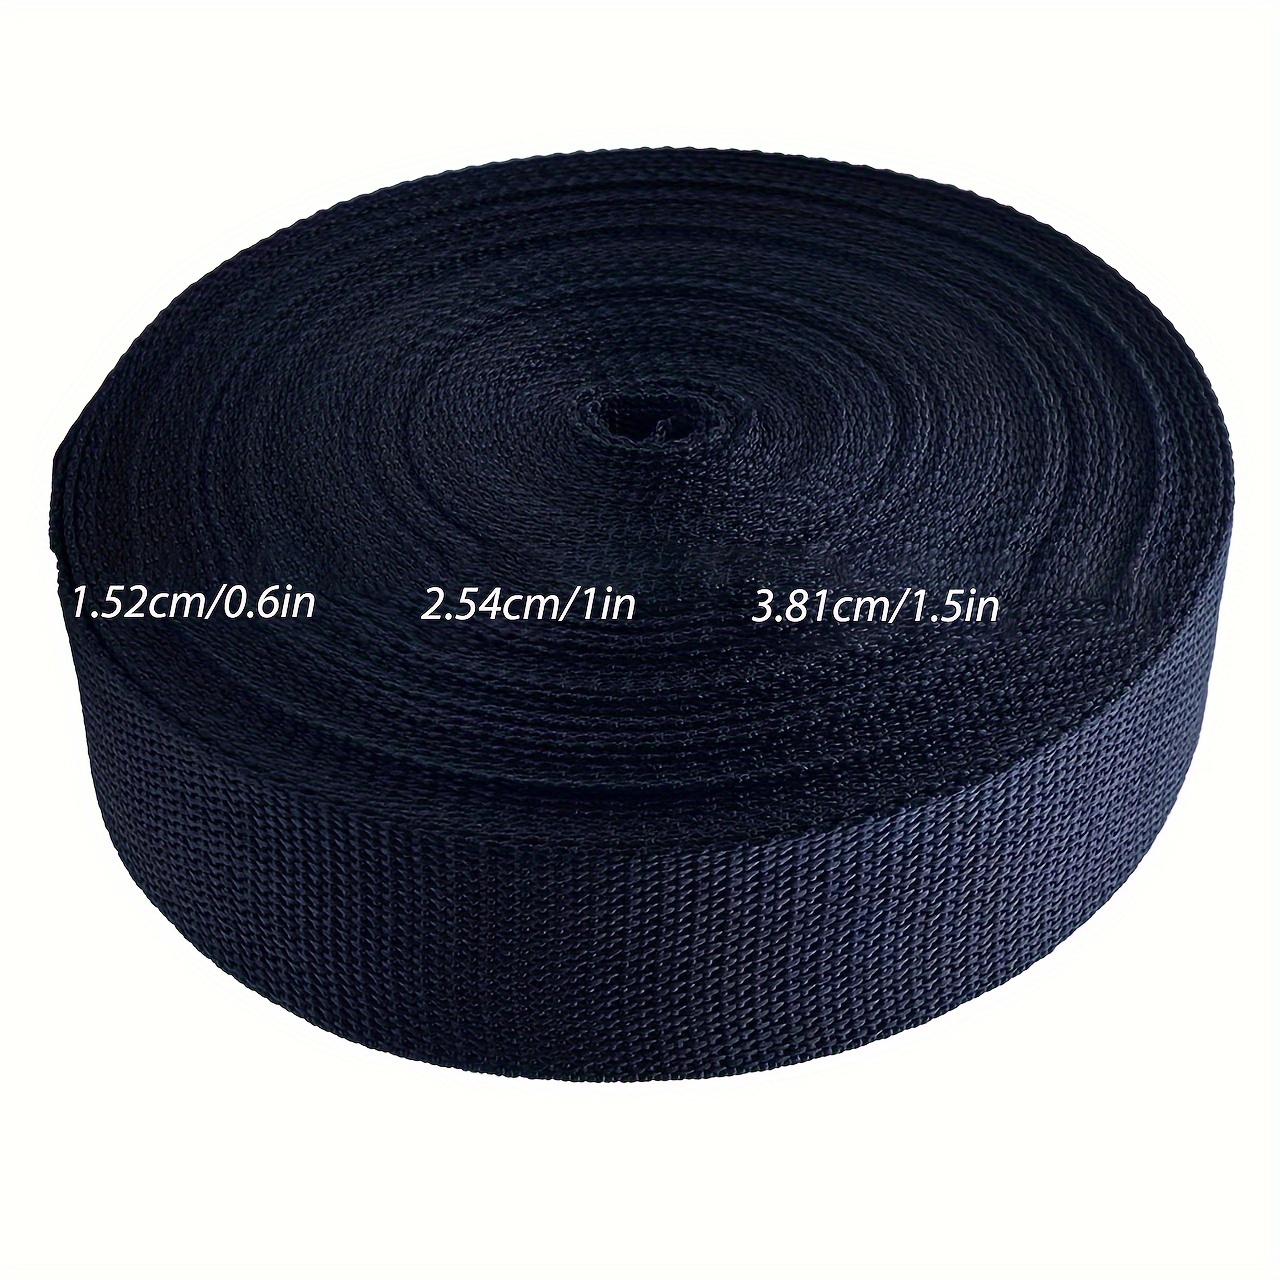 

Extra Strong Heavyweight Nylon Webbing - 0.6/1/1.5in Wide, 32.8ft Long Strap For Indoor/outdoor Use - Perfect For Backpacks, Diy Crafts & Equipment Repair